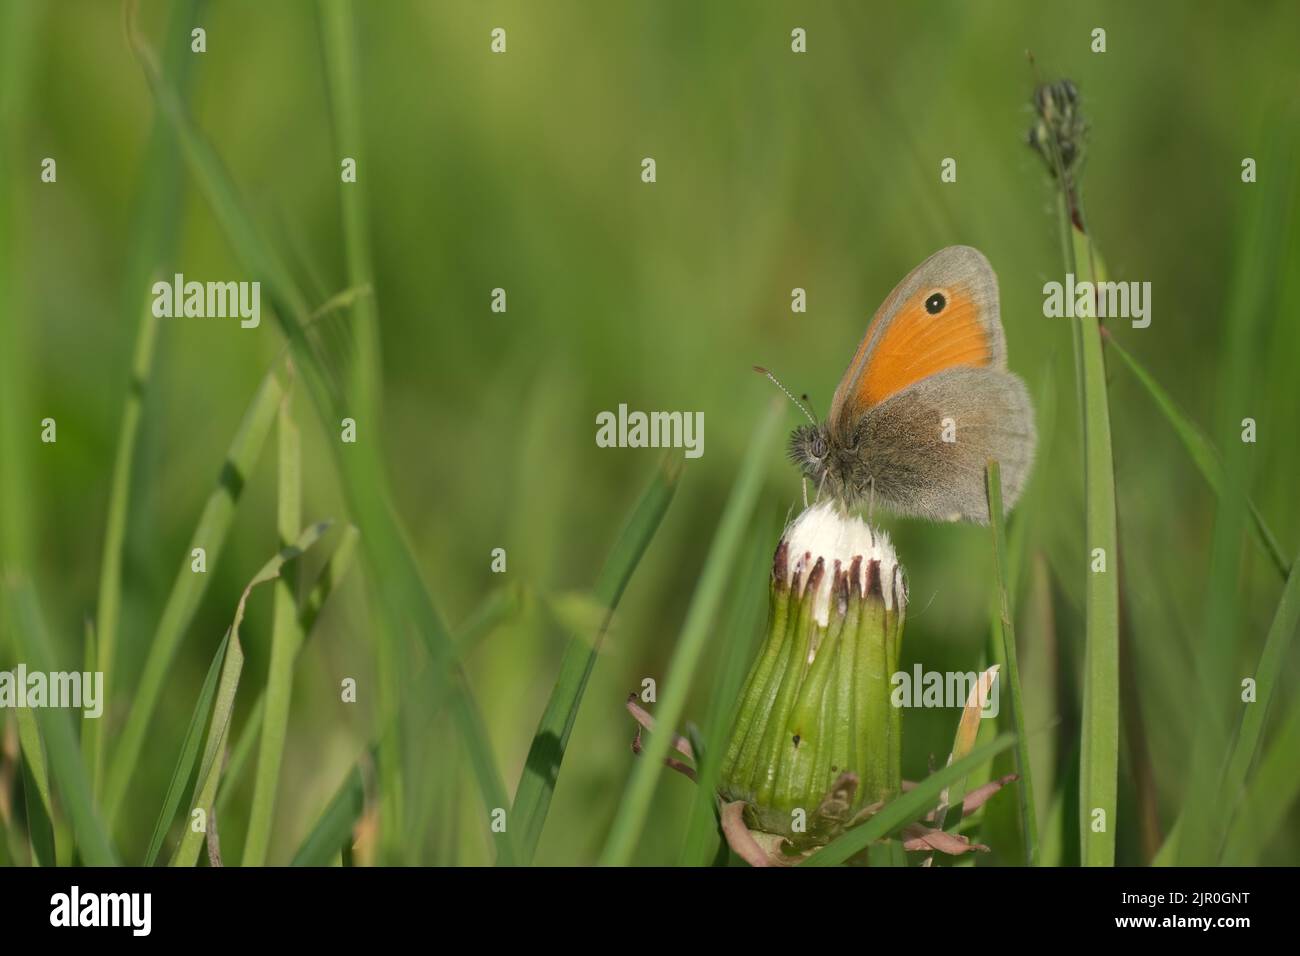 Small heath butterfly in nature resting on a flower, tiny orange and grey butterfly Stock Photo